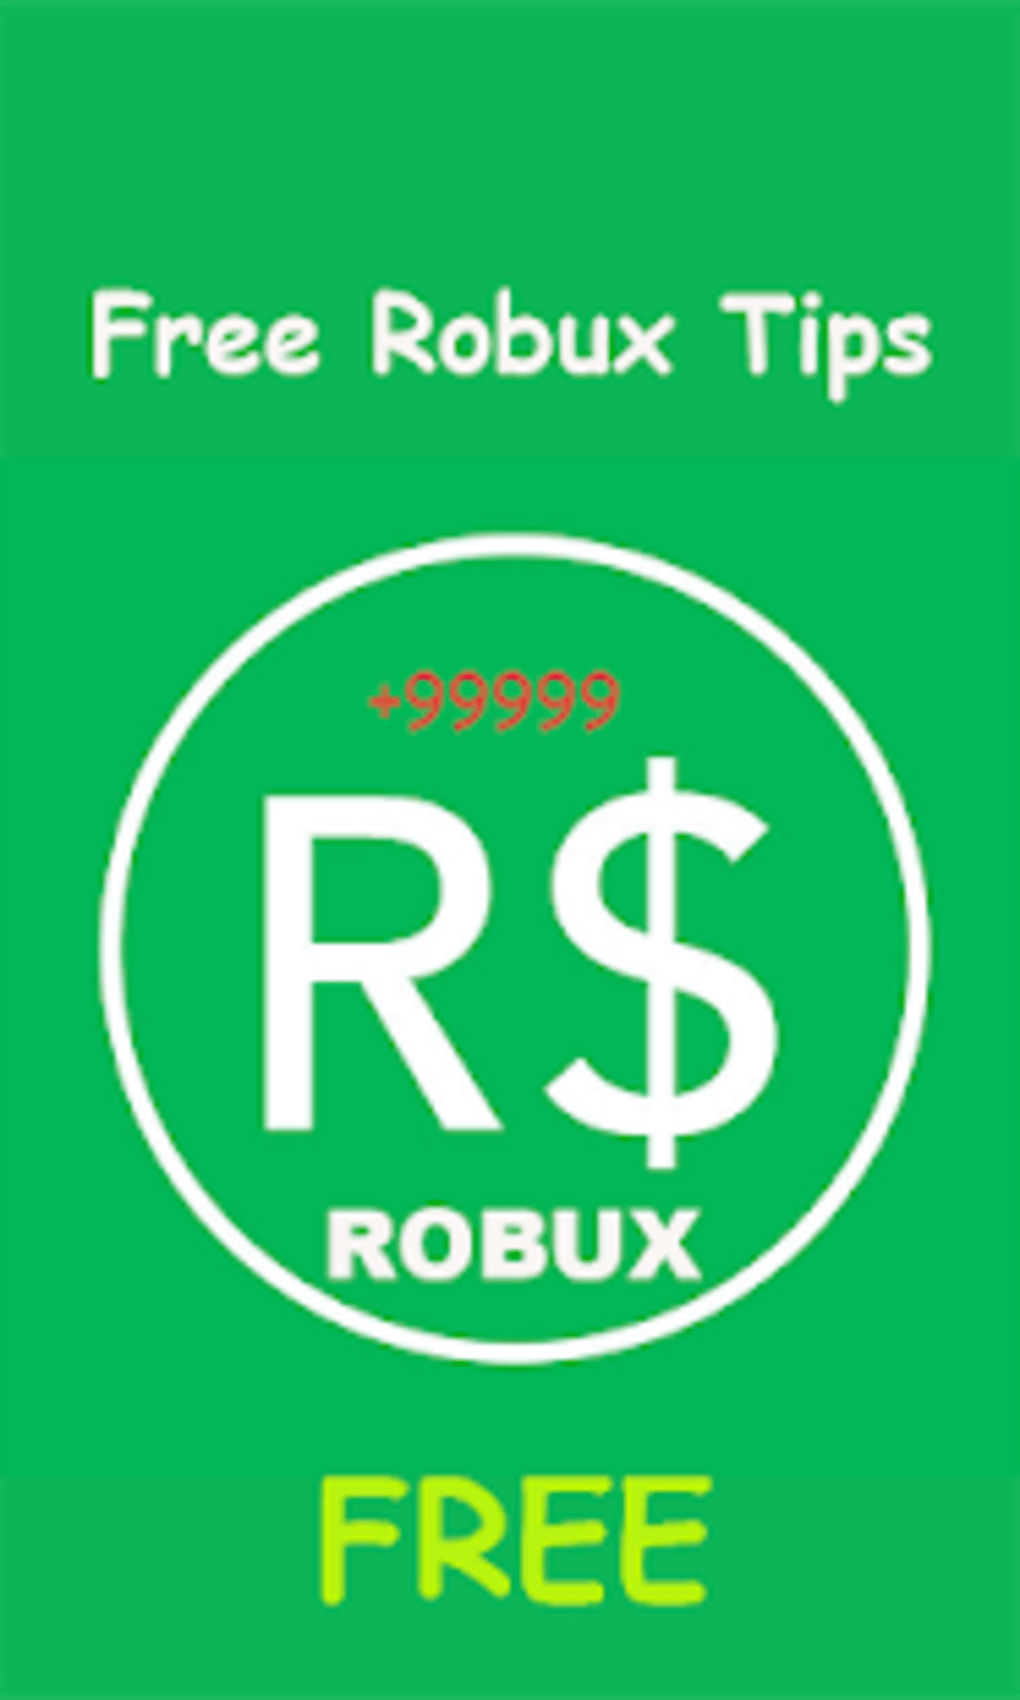 New Free Robux Guide And Tips For Android Download - guide on how to get free robux for roblox for android apk